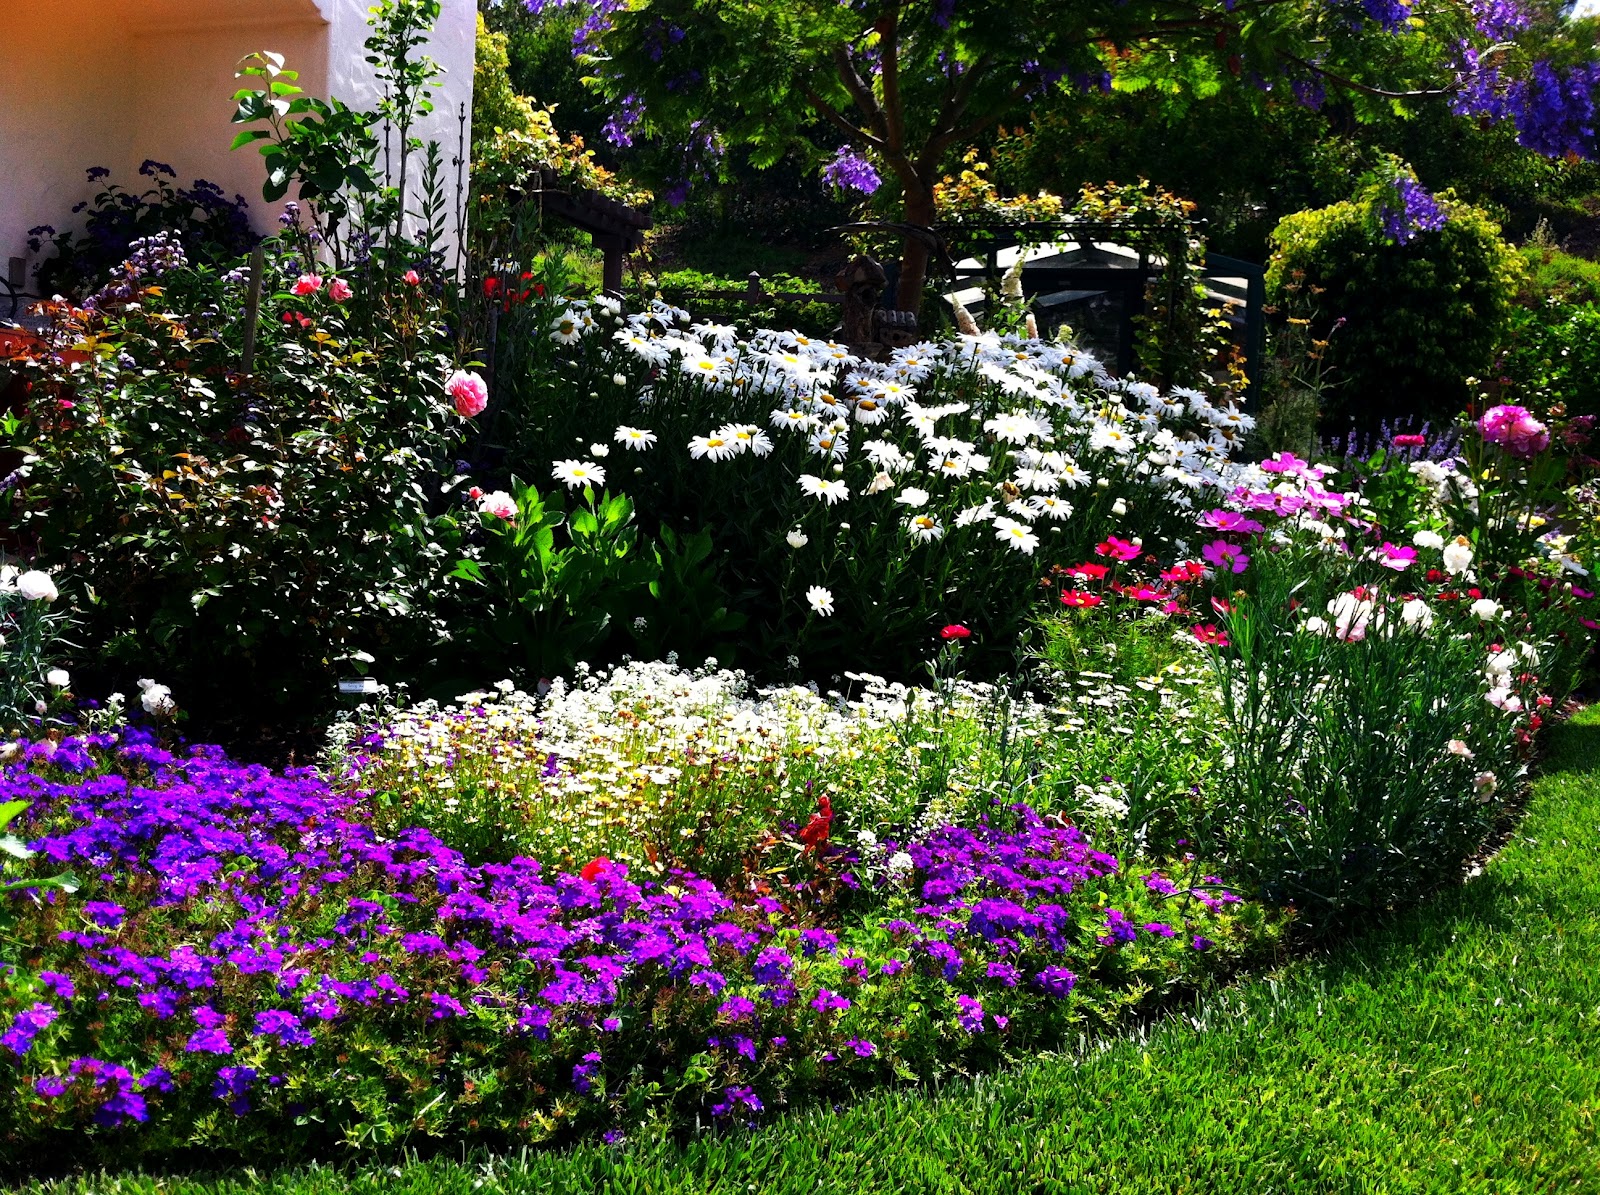 Grow It Now: Five Simple Steps to Designing Beautiful Flower Beds